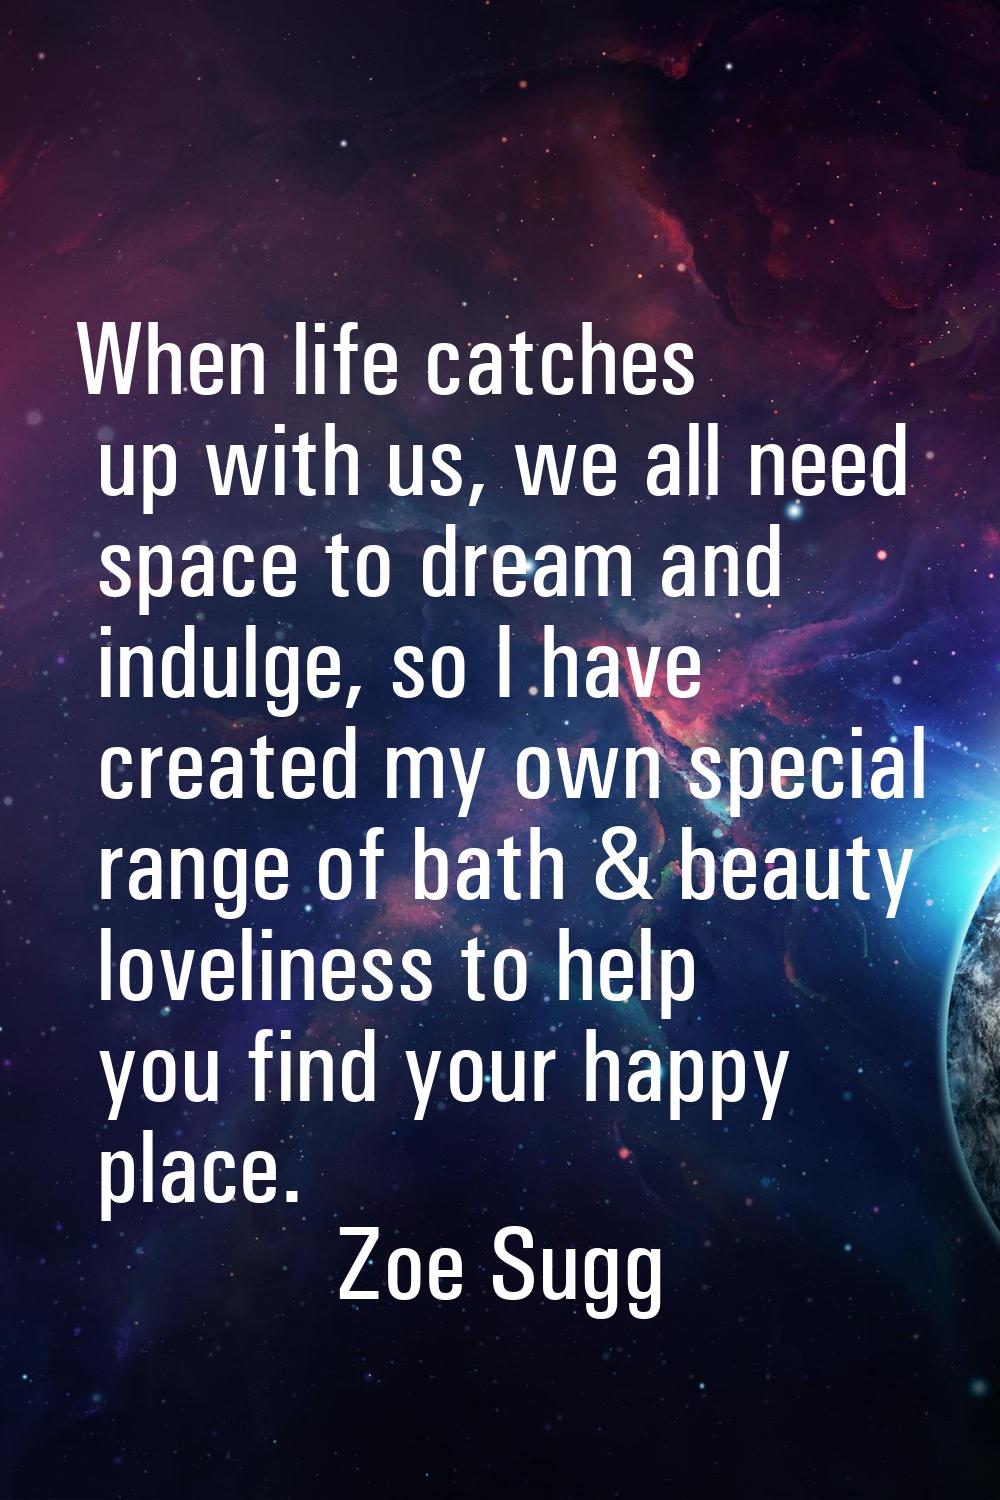 When life catches up with us, we all need space to dream and indulge, so I have created my own spec